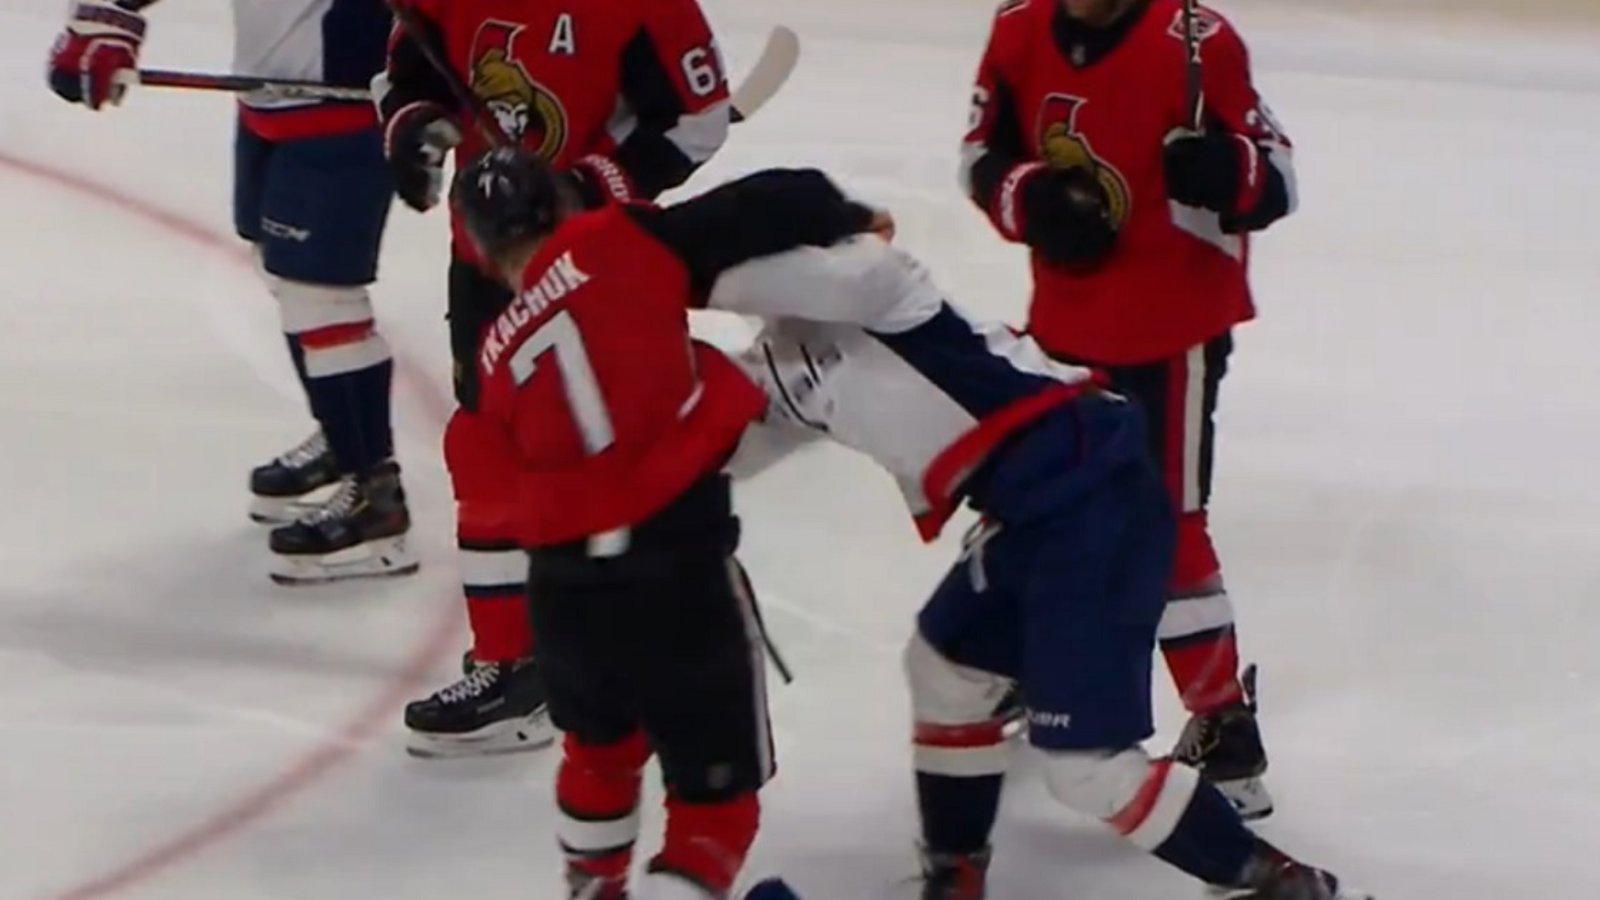 Brady Tkachuk takes exception to a hit and immediately drops the gloves!